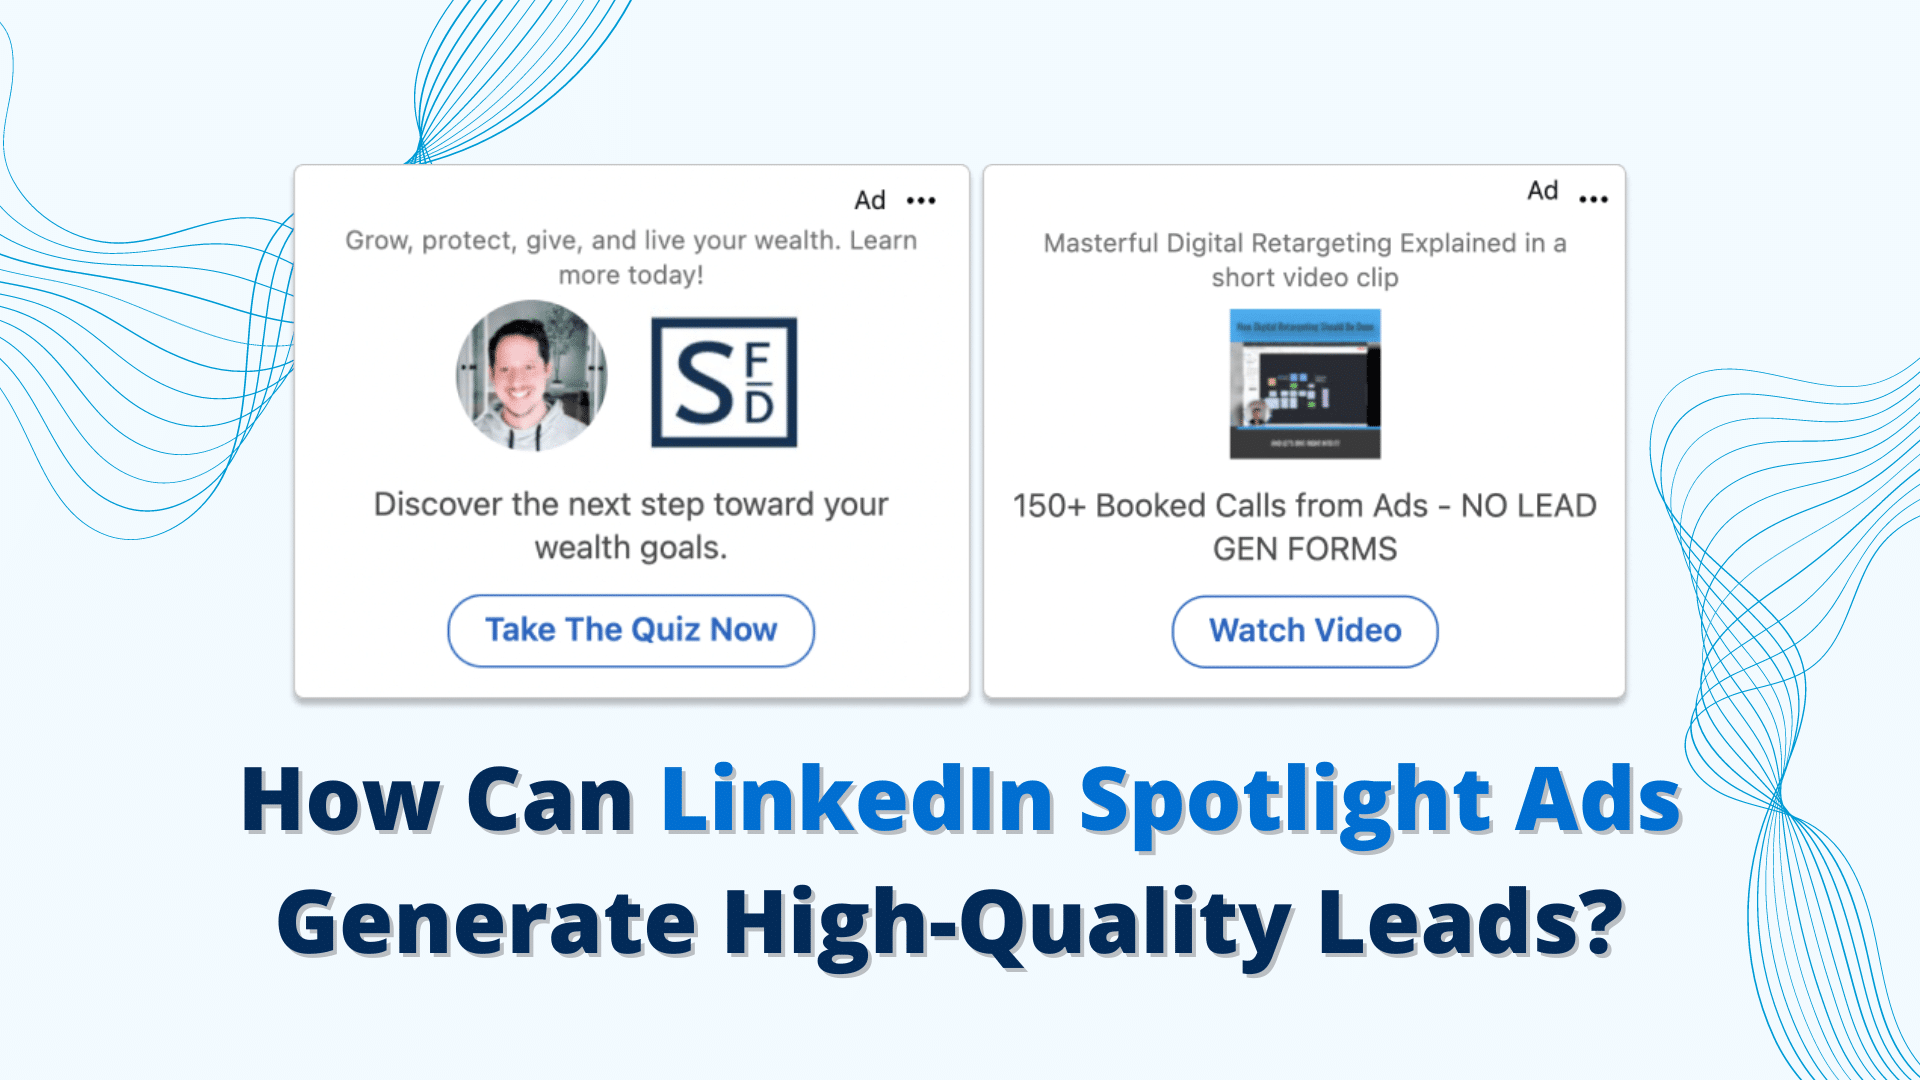 How Can Linkedin Spotlight Ads Generate High-Quality Leads